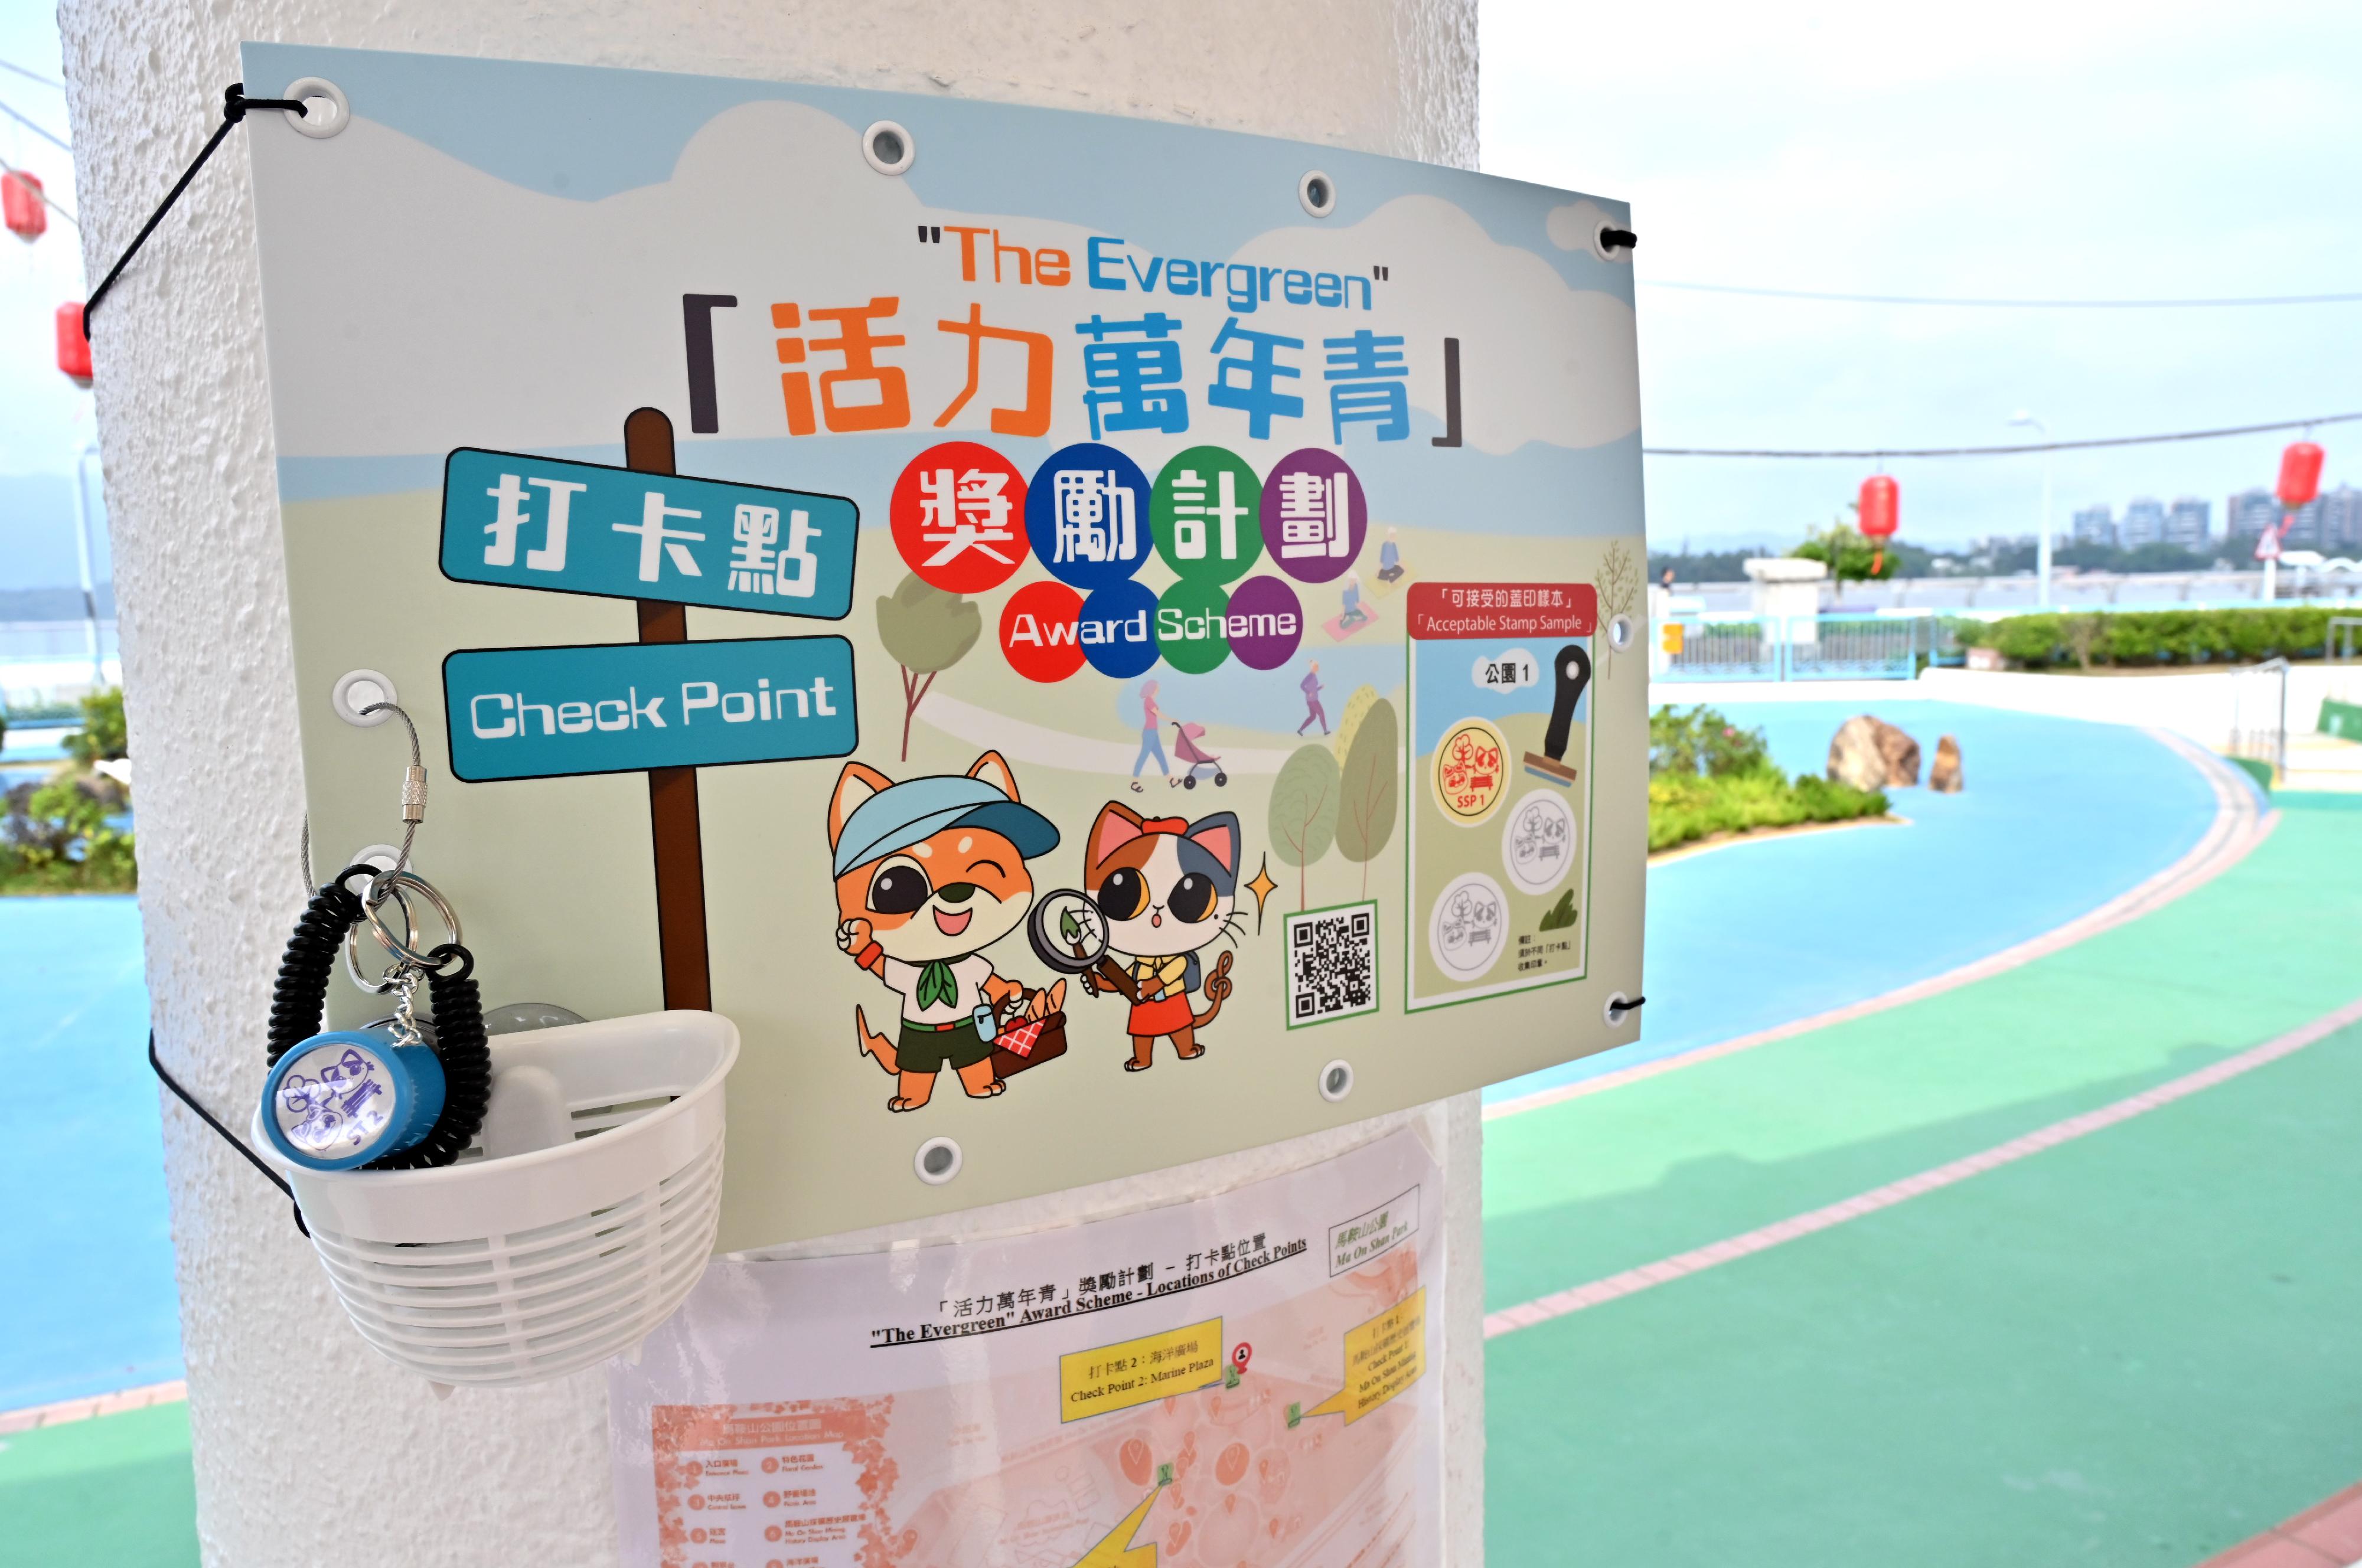 The Leisure and Cultural Services Department will launch a series of caring programmes and measures for senior citizens, persons with disabilities and people in need. Photo shows a check point at a designated park for the elderly to stamp their park visit record card for "The Evergreen" Award Scheme.